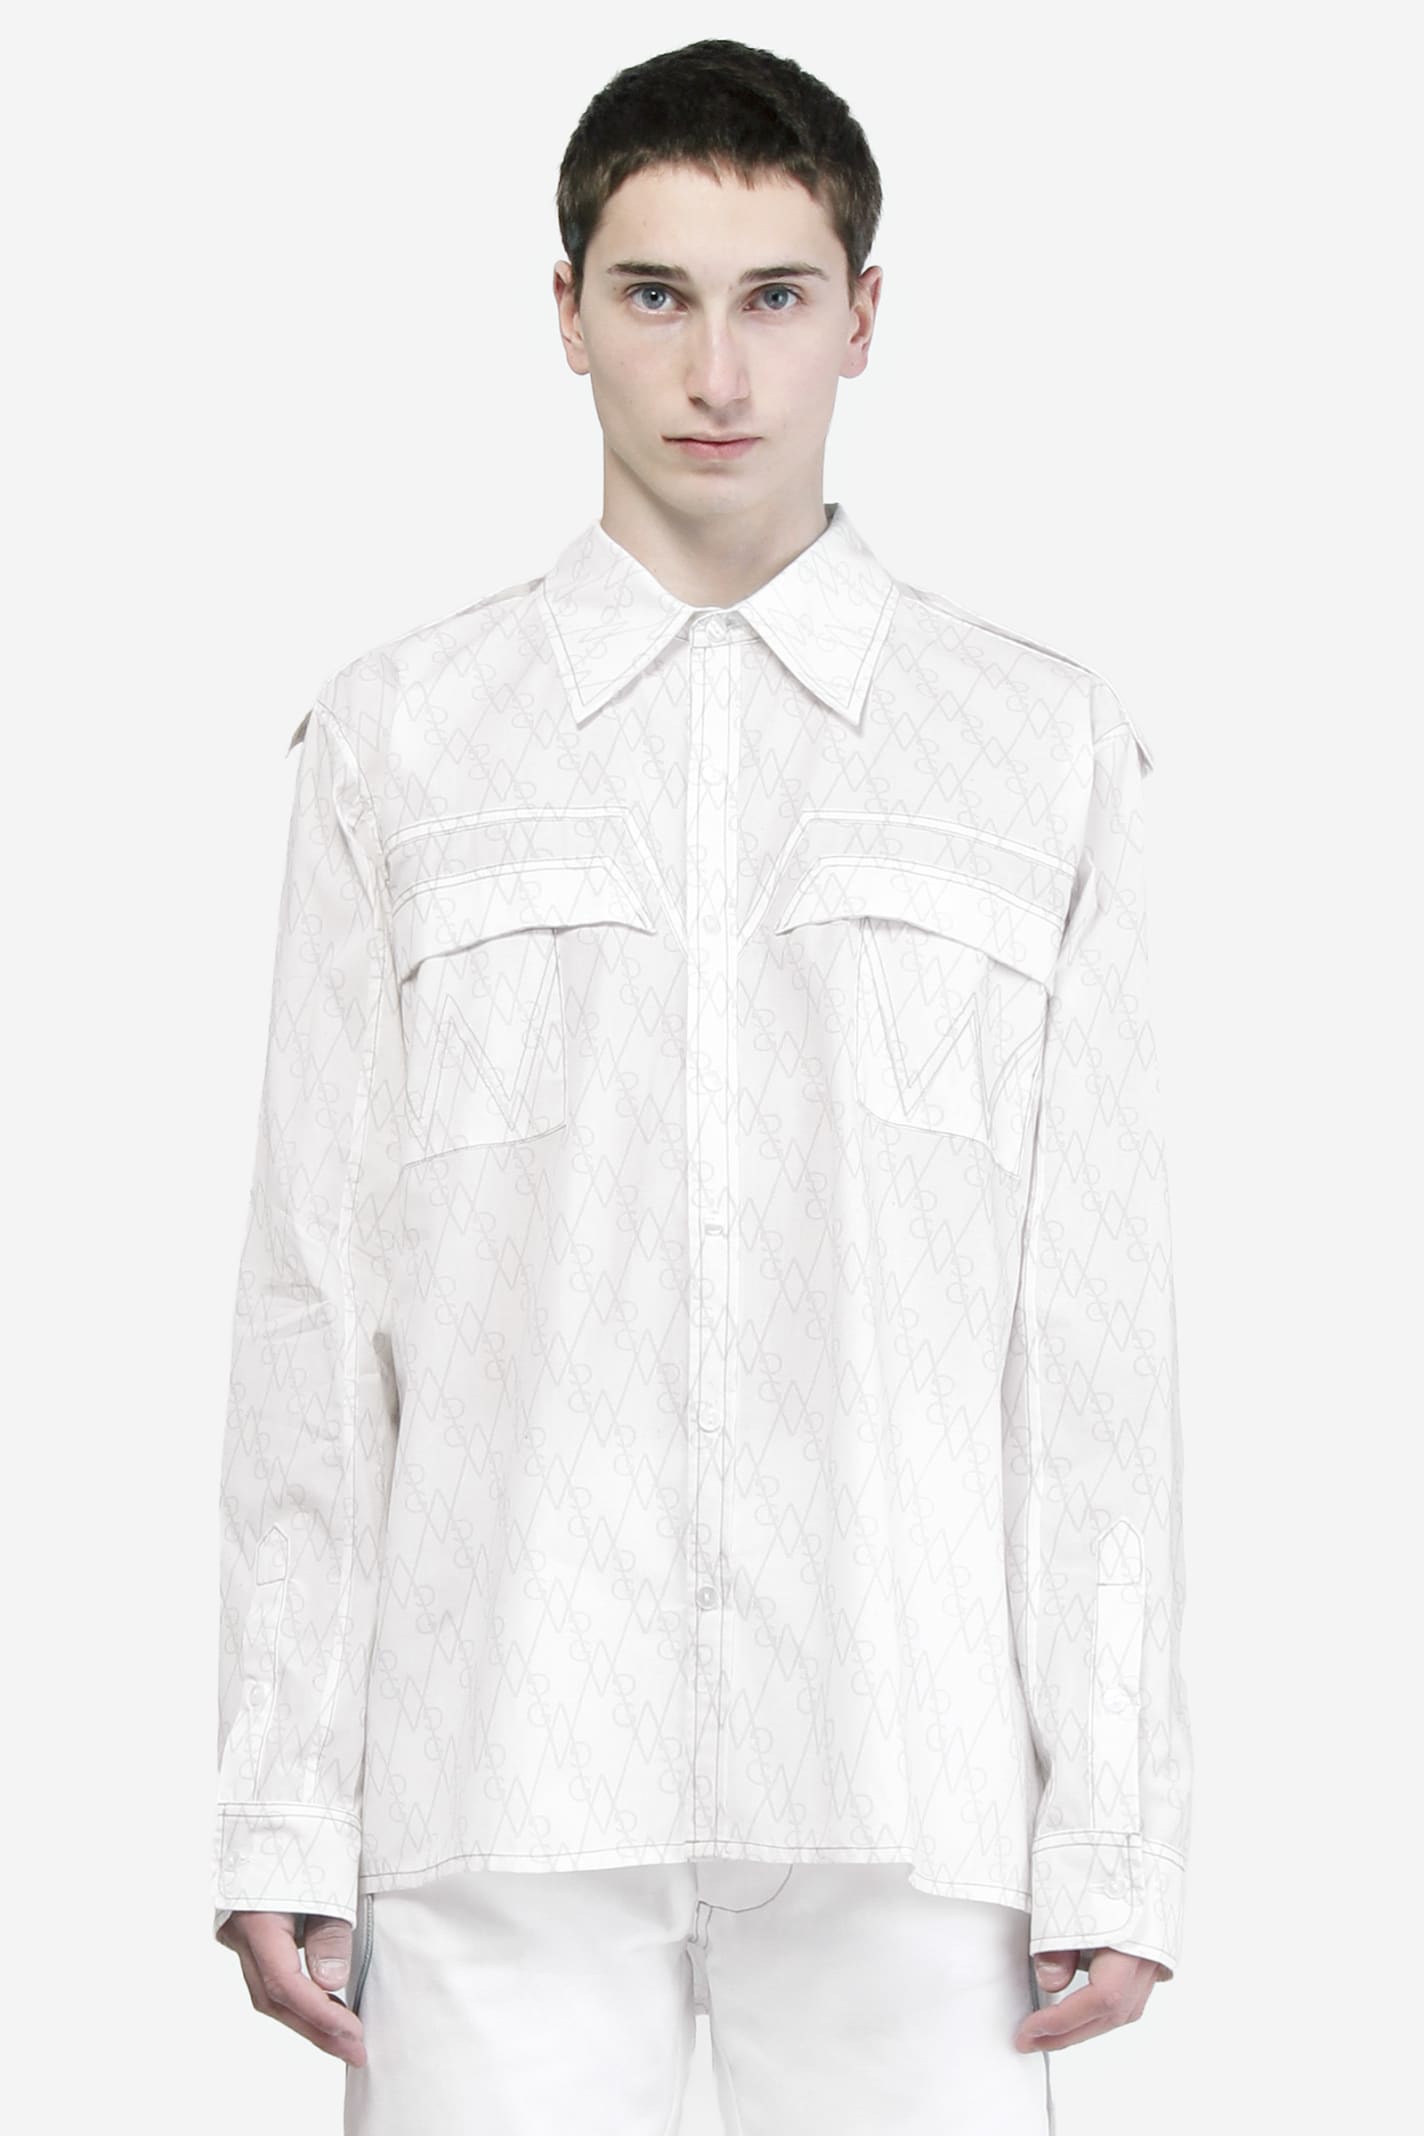 GEORGES WENDELL SHIRT,SH04M-SS21